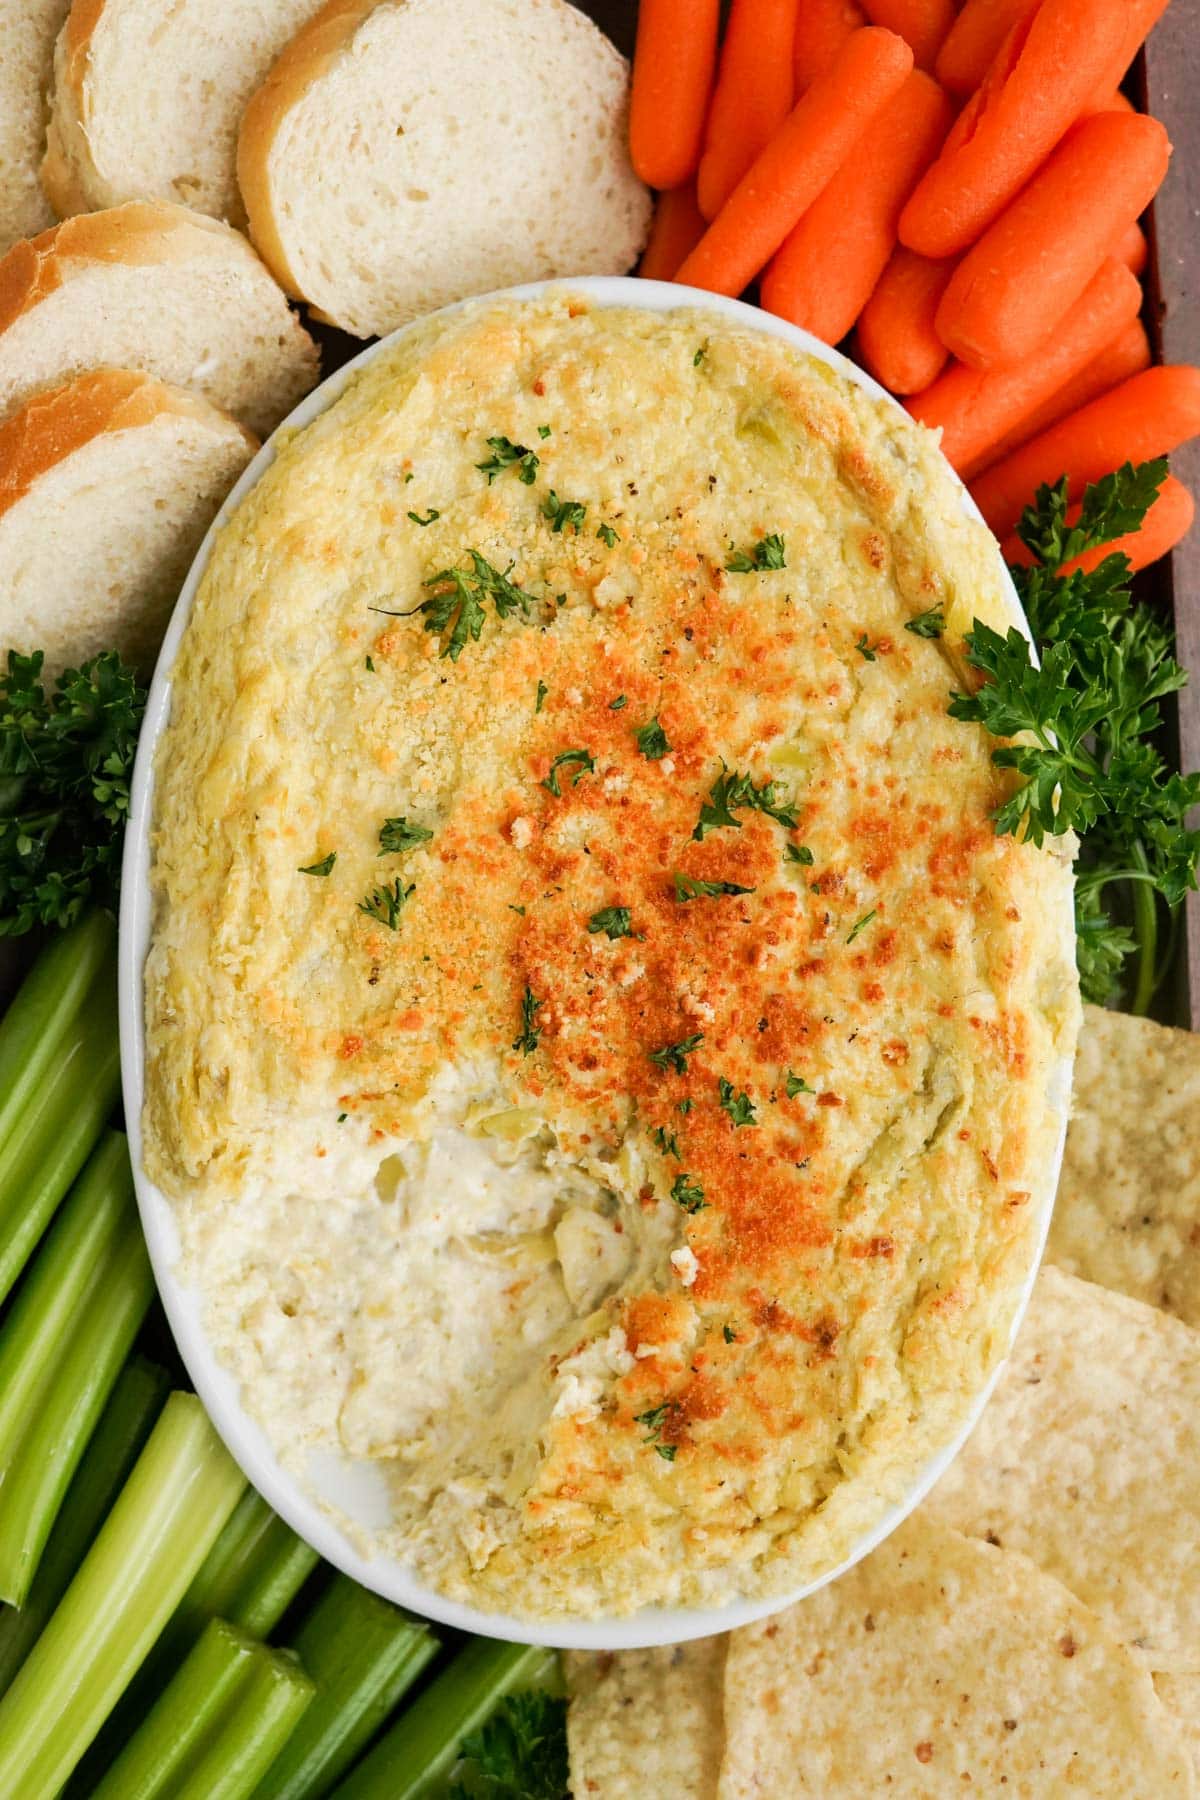 artichoke dip in a white dish with carrots, celery and bread